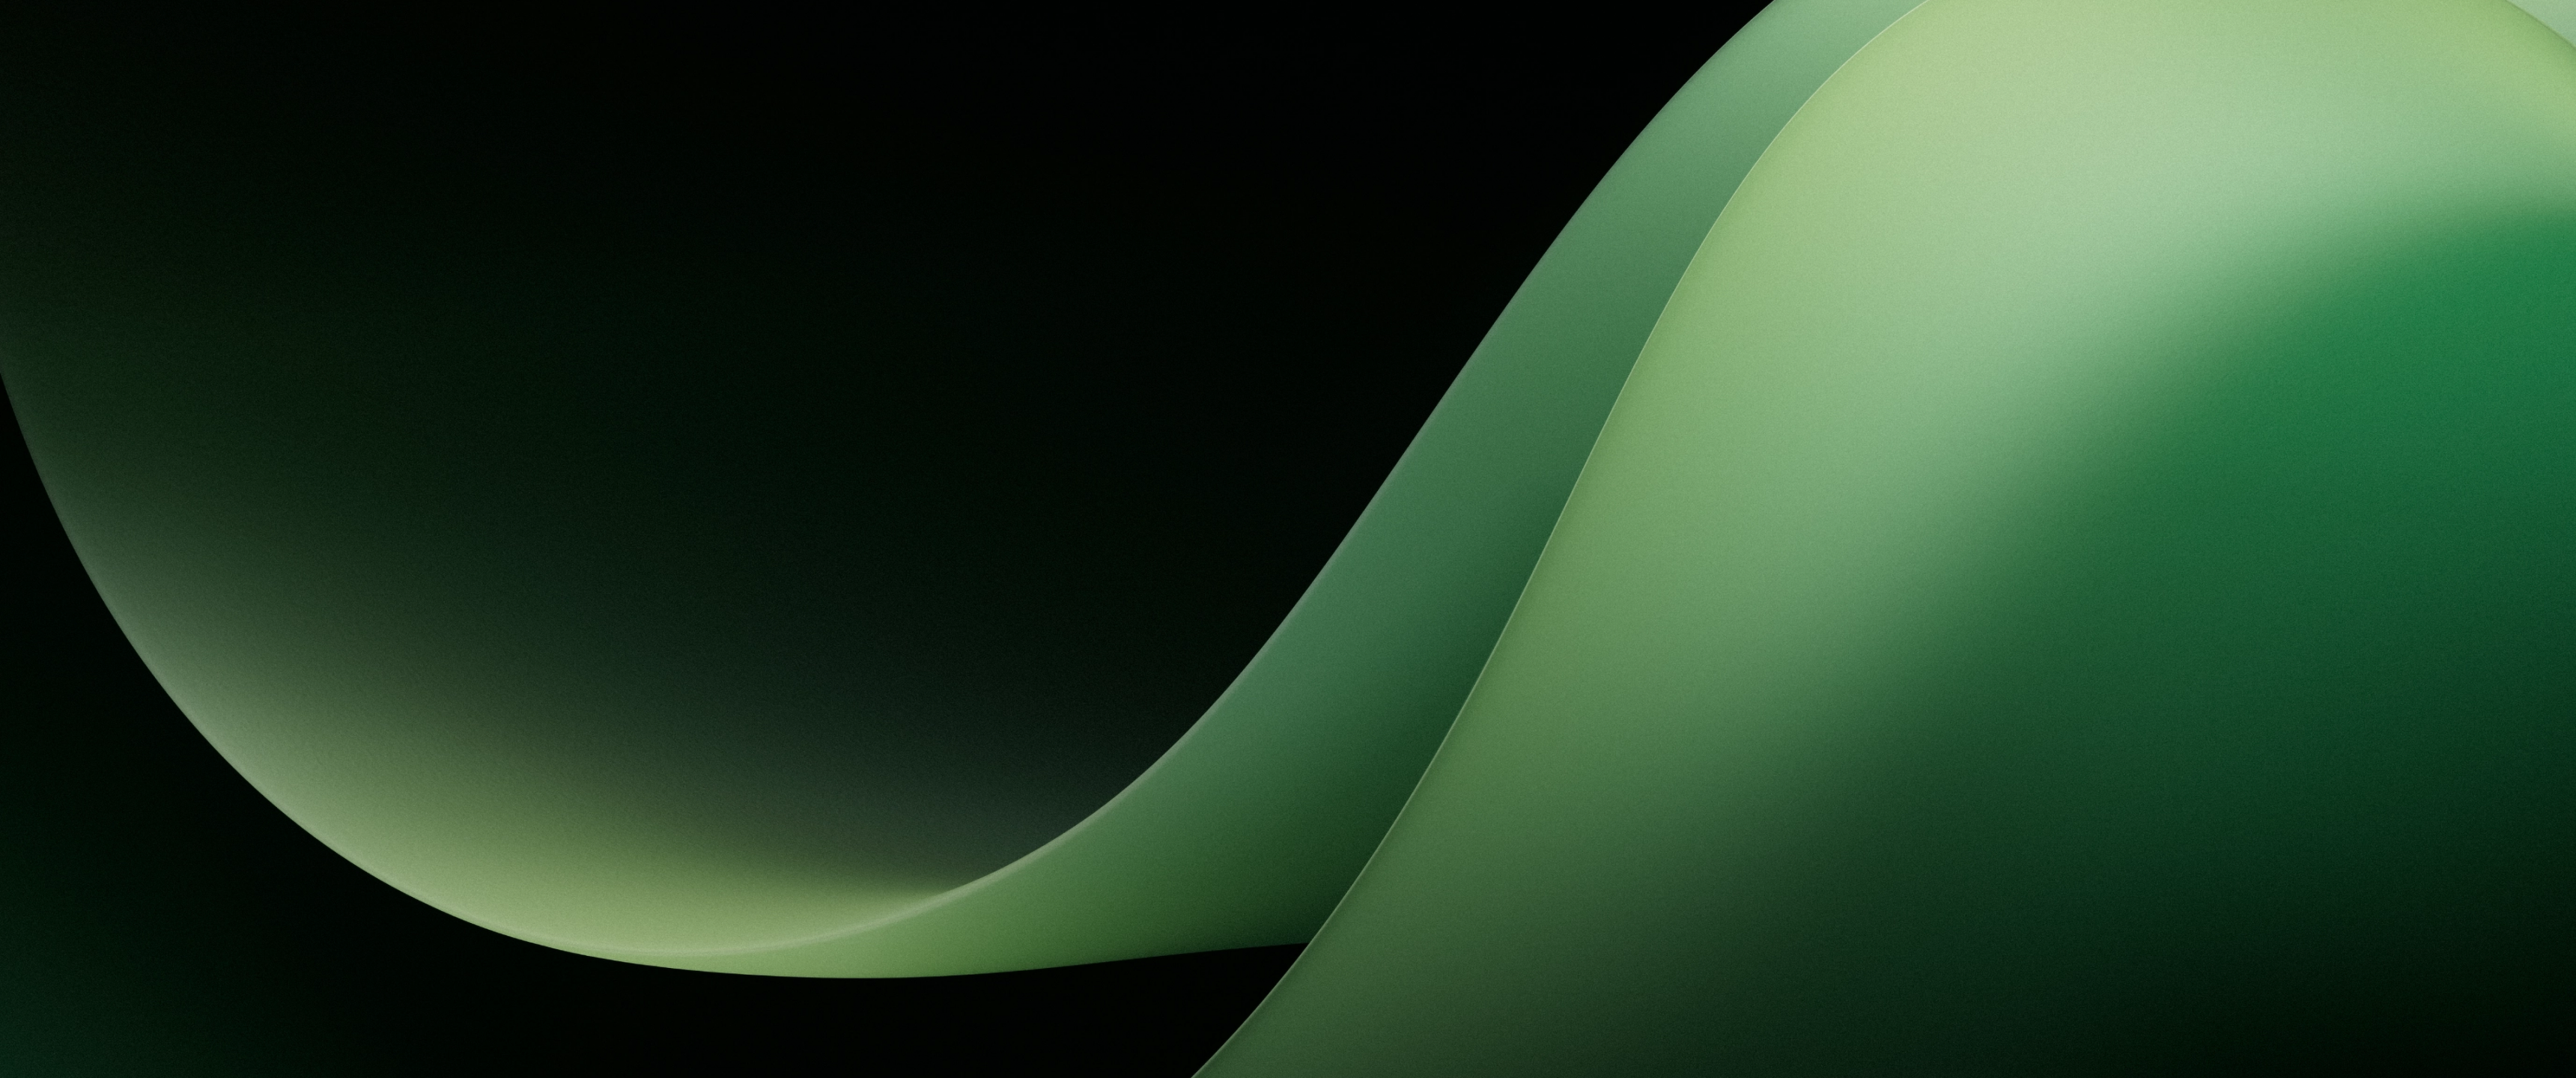 Microsoft Surface Duo 2 Wallpaper 4K, Green background, Abstract